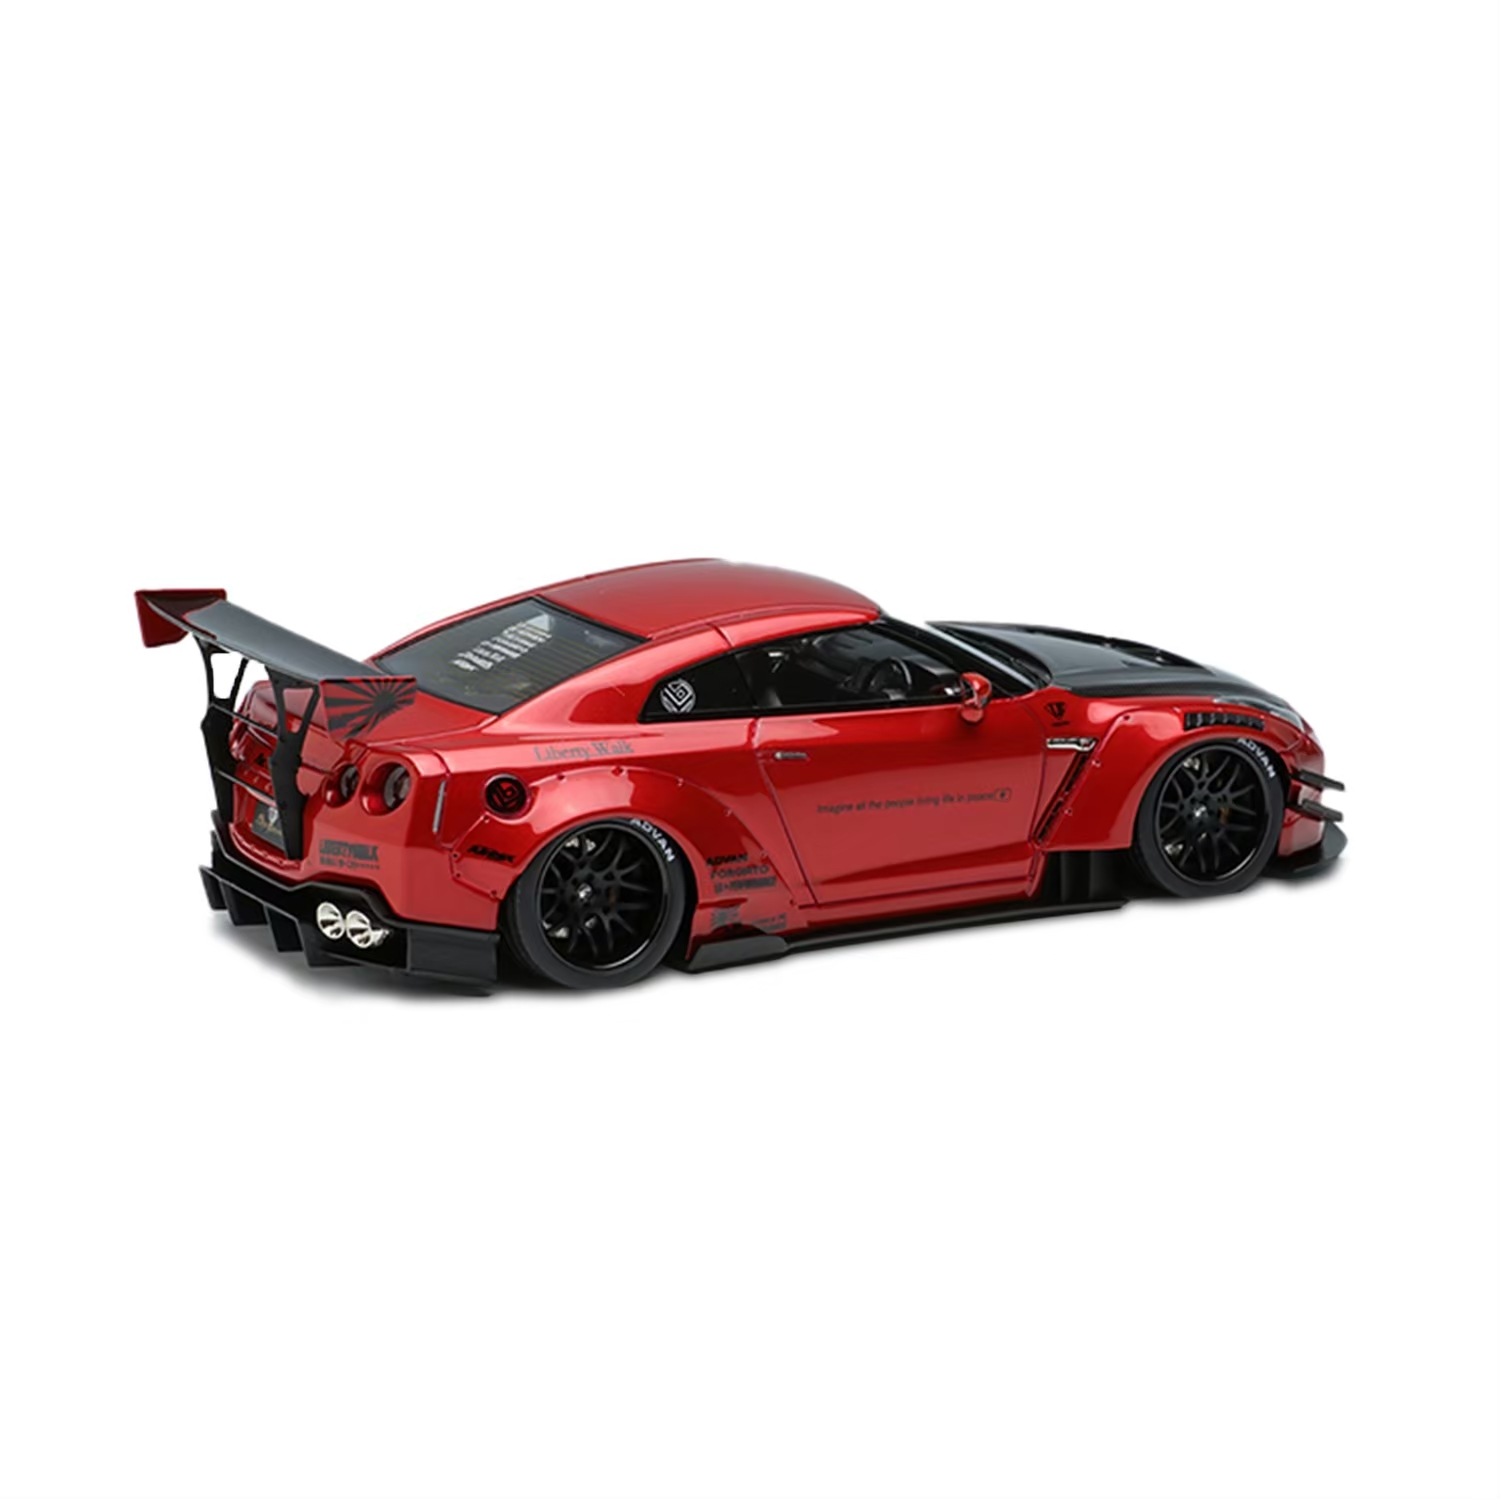 Make Up 1/43 LB WORKS GTR Type 2 Candy Red - LB-ONLINE STORE